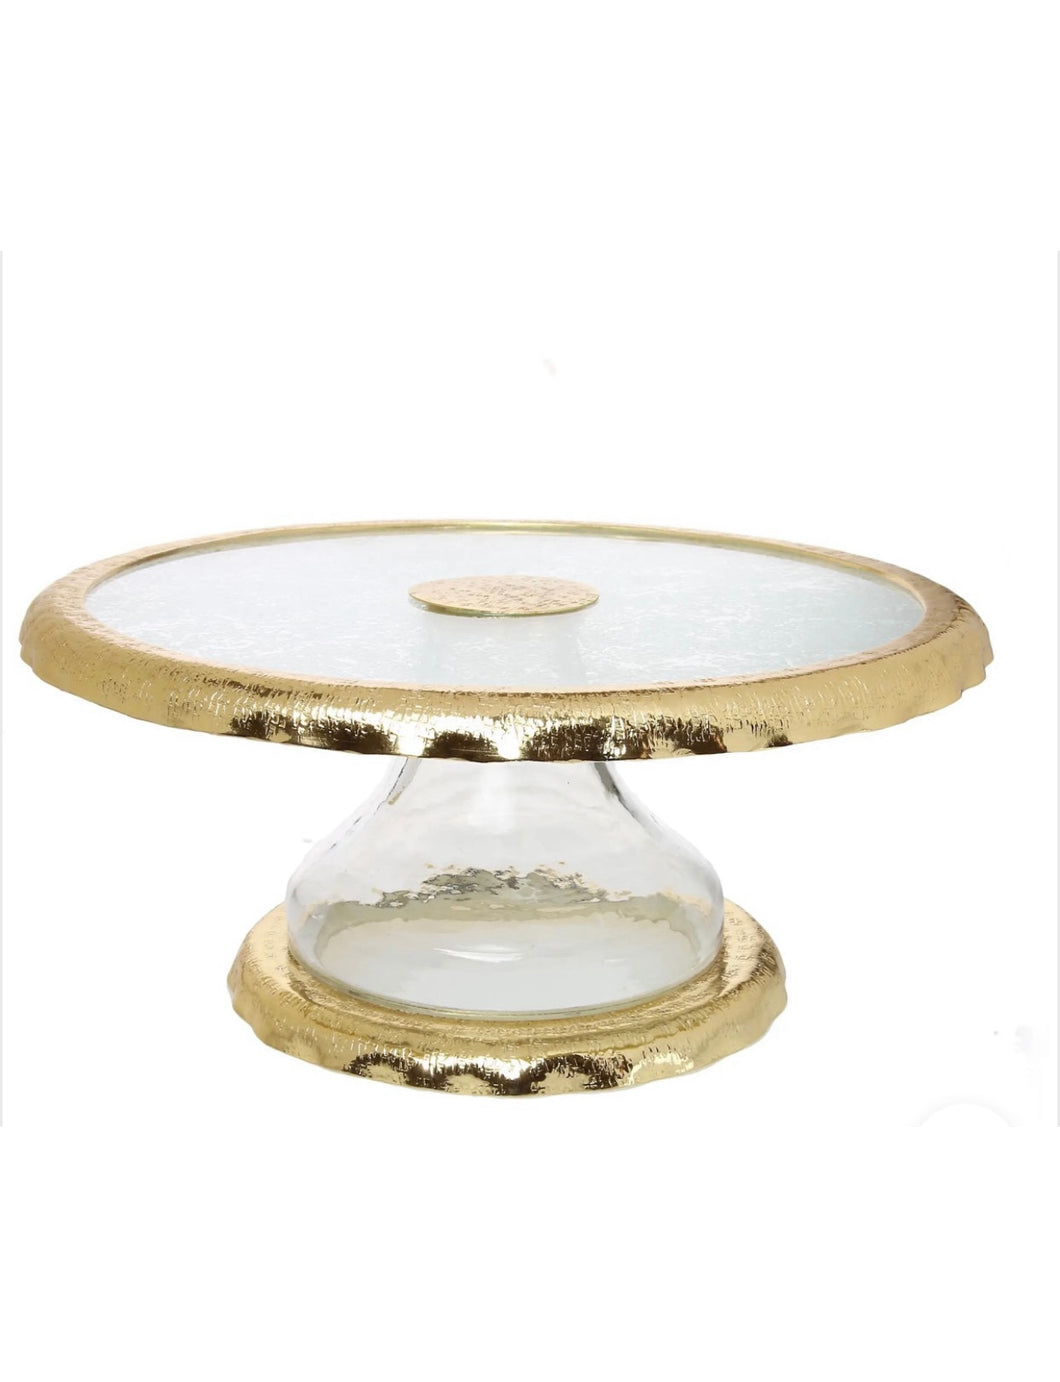 Glass Cake Stand with Gold Edge